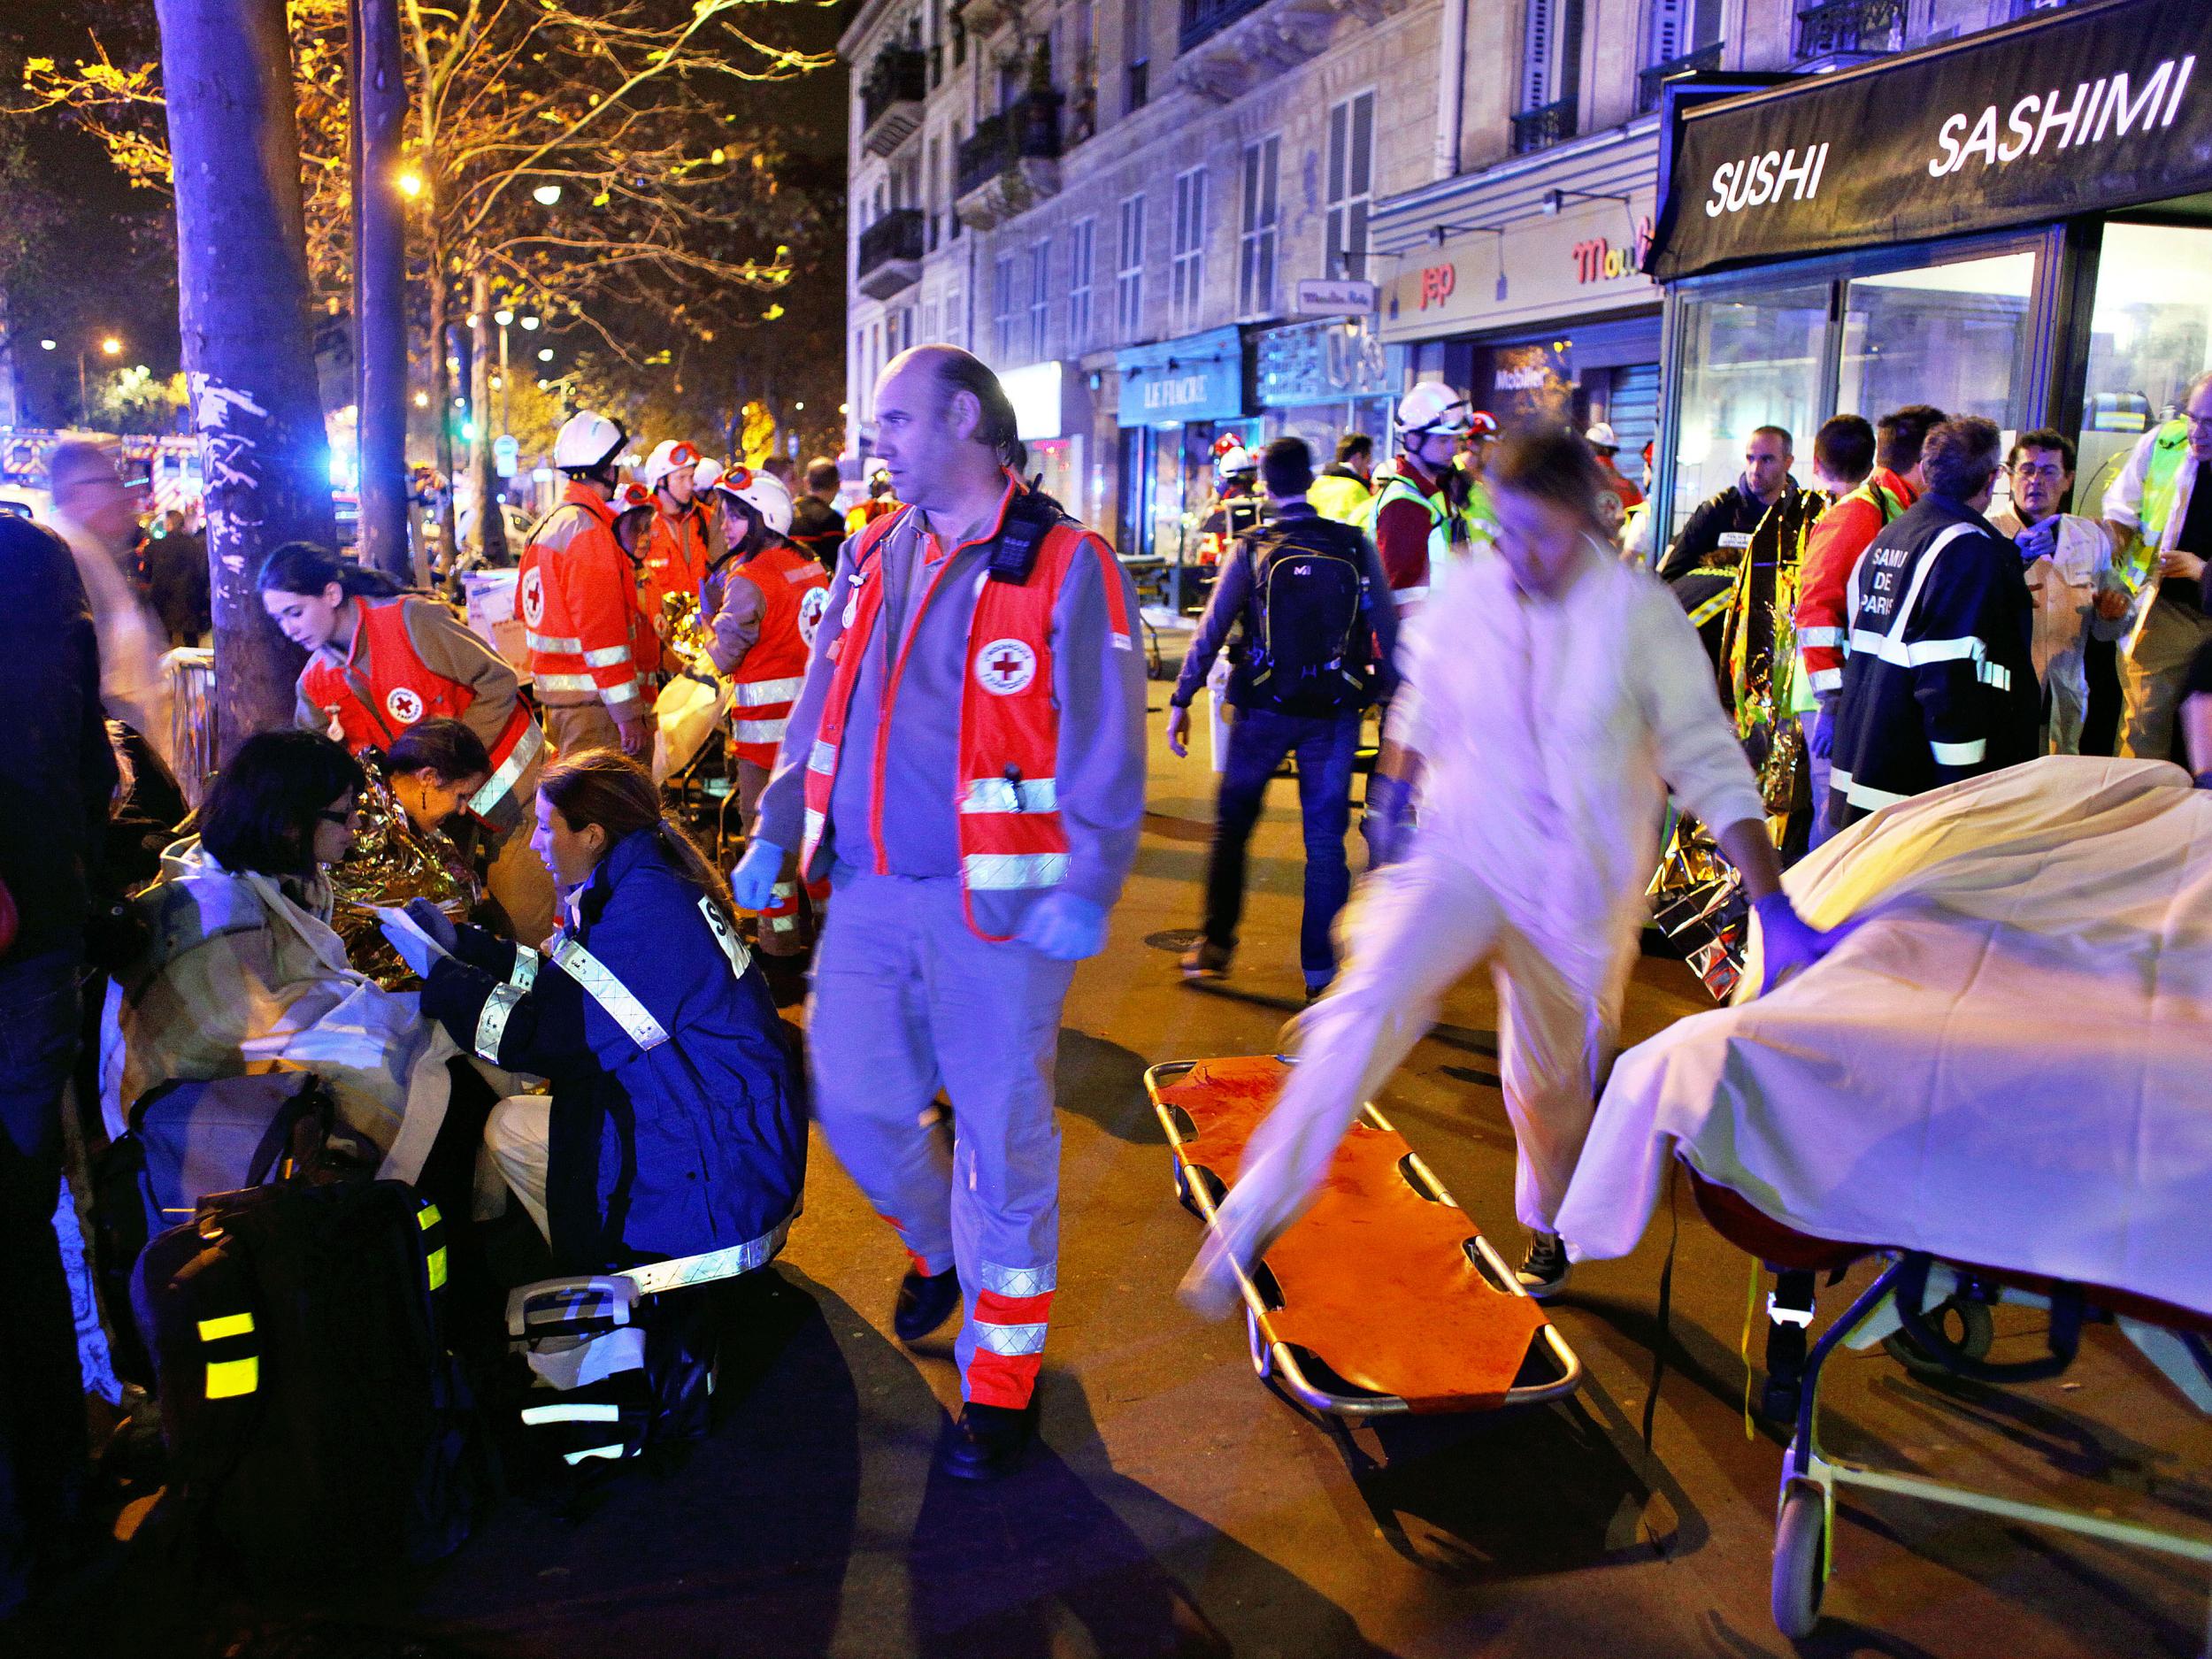 The plot follows a similar format to the Paris attacks, where militants used guns and suicide vests